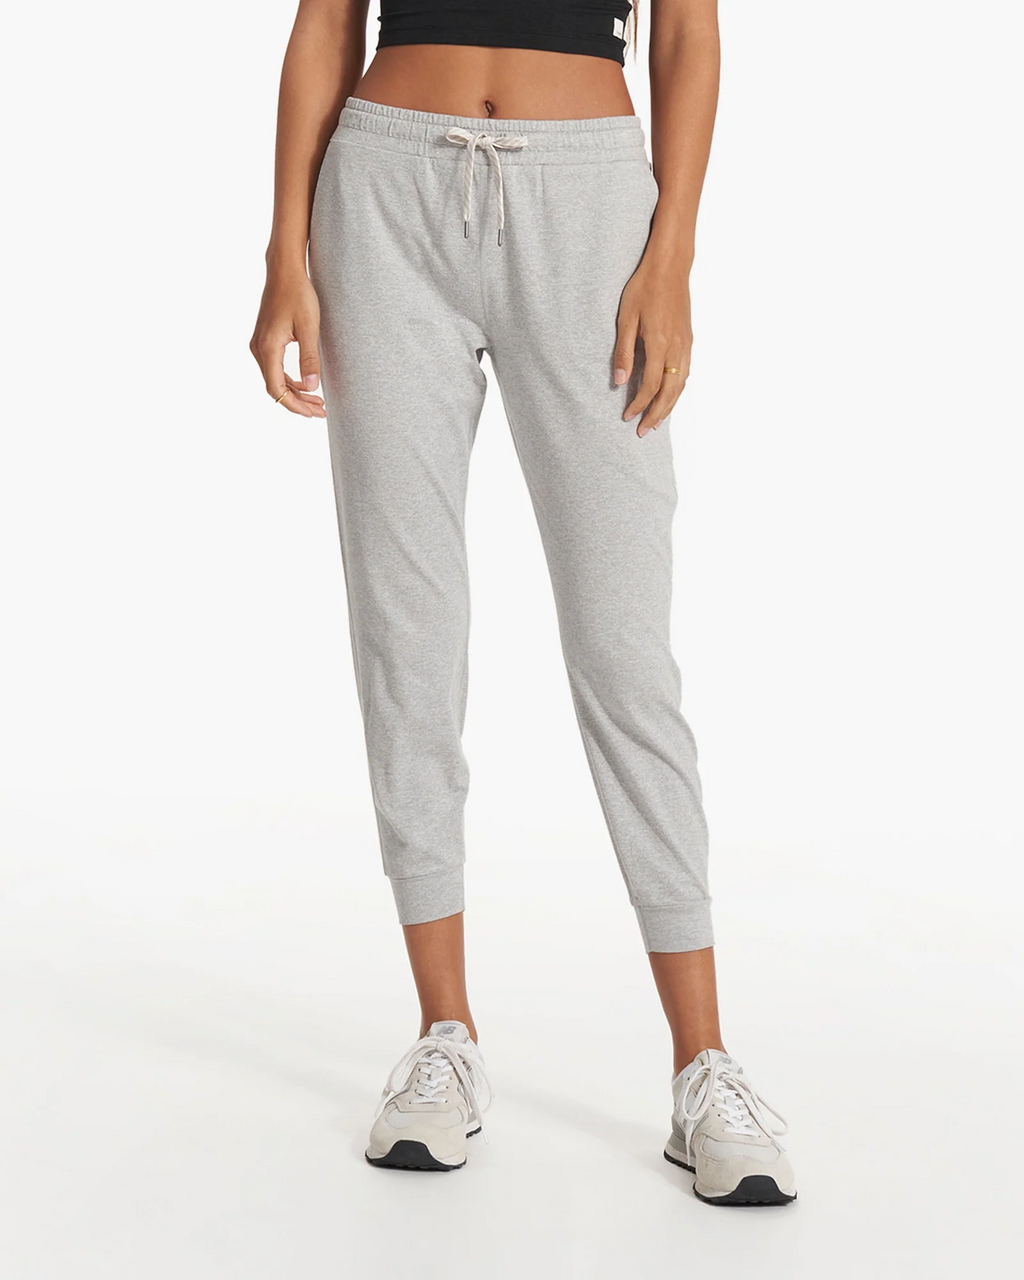 Women's Performance Jogger - Pale Grey Heather - Ramsey Outdoor